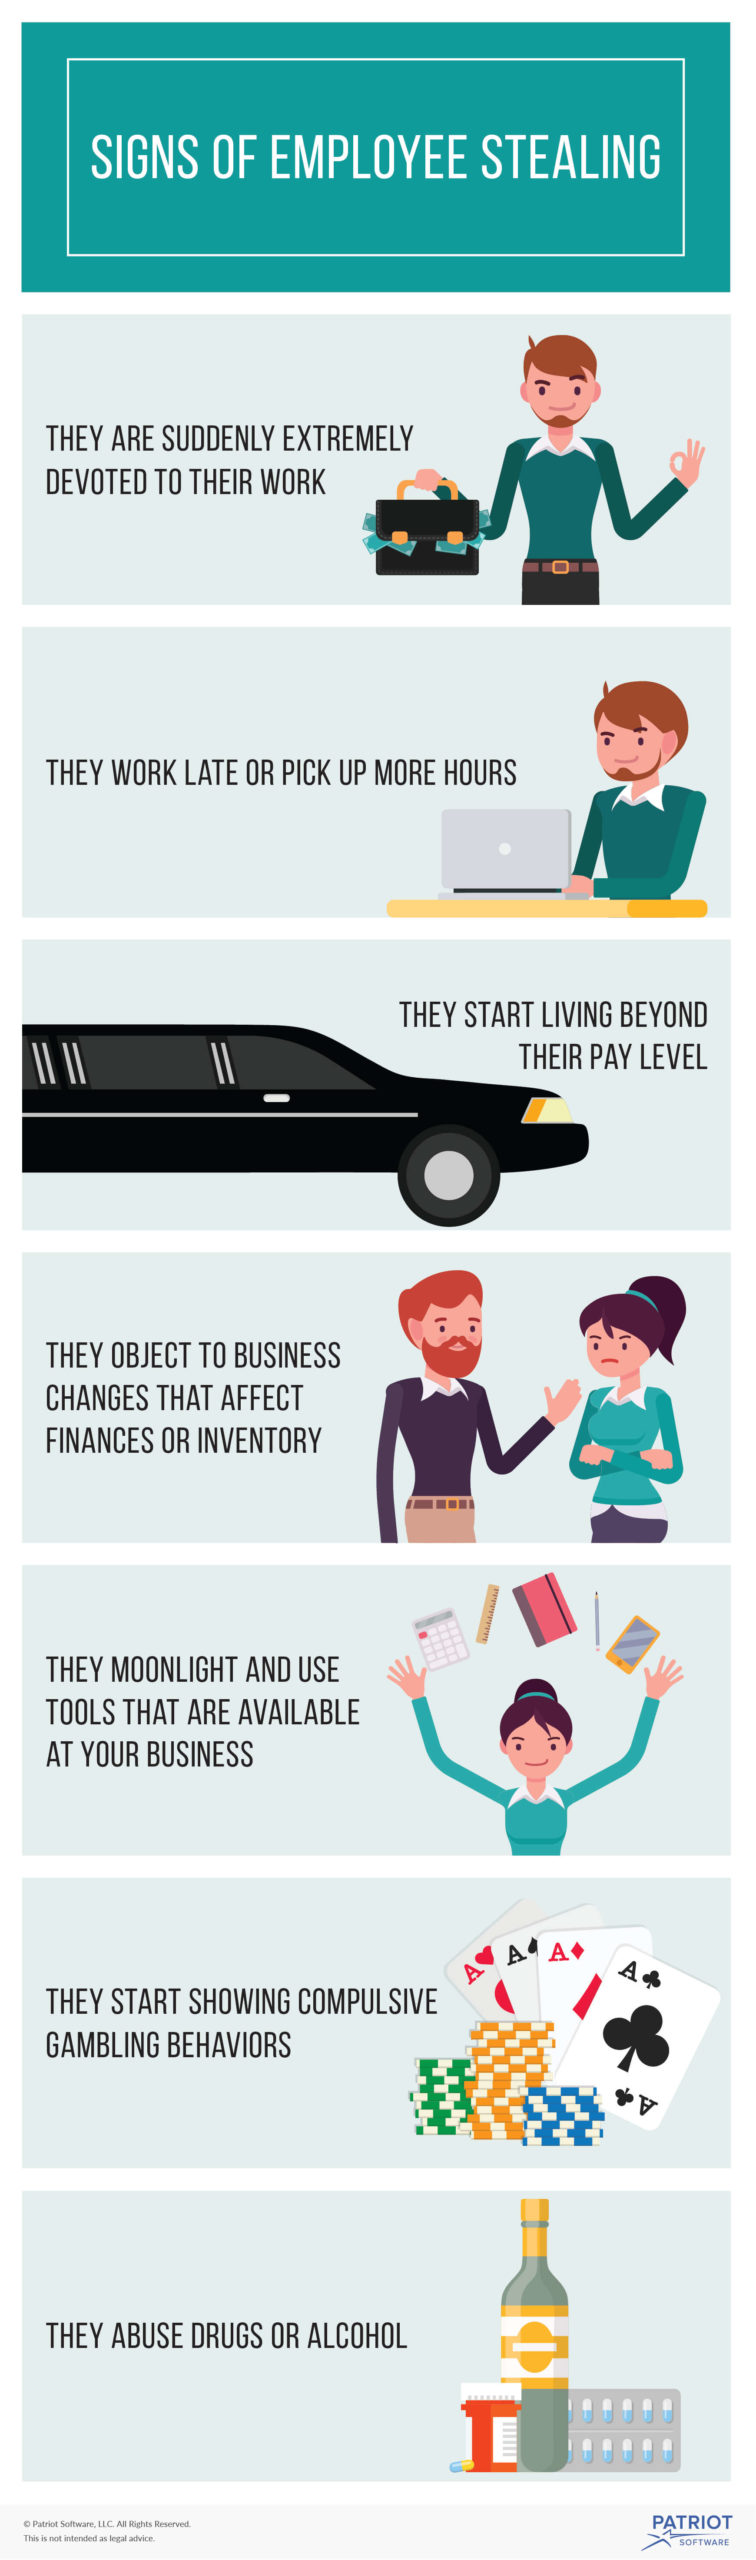 Infographic: Signs of Employee Stealing